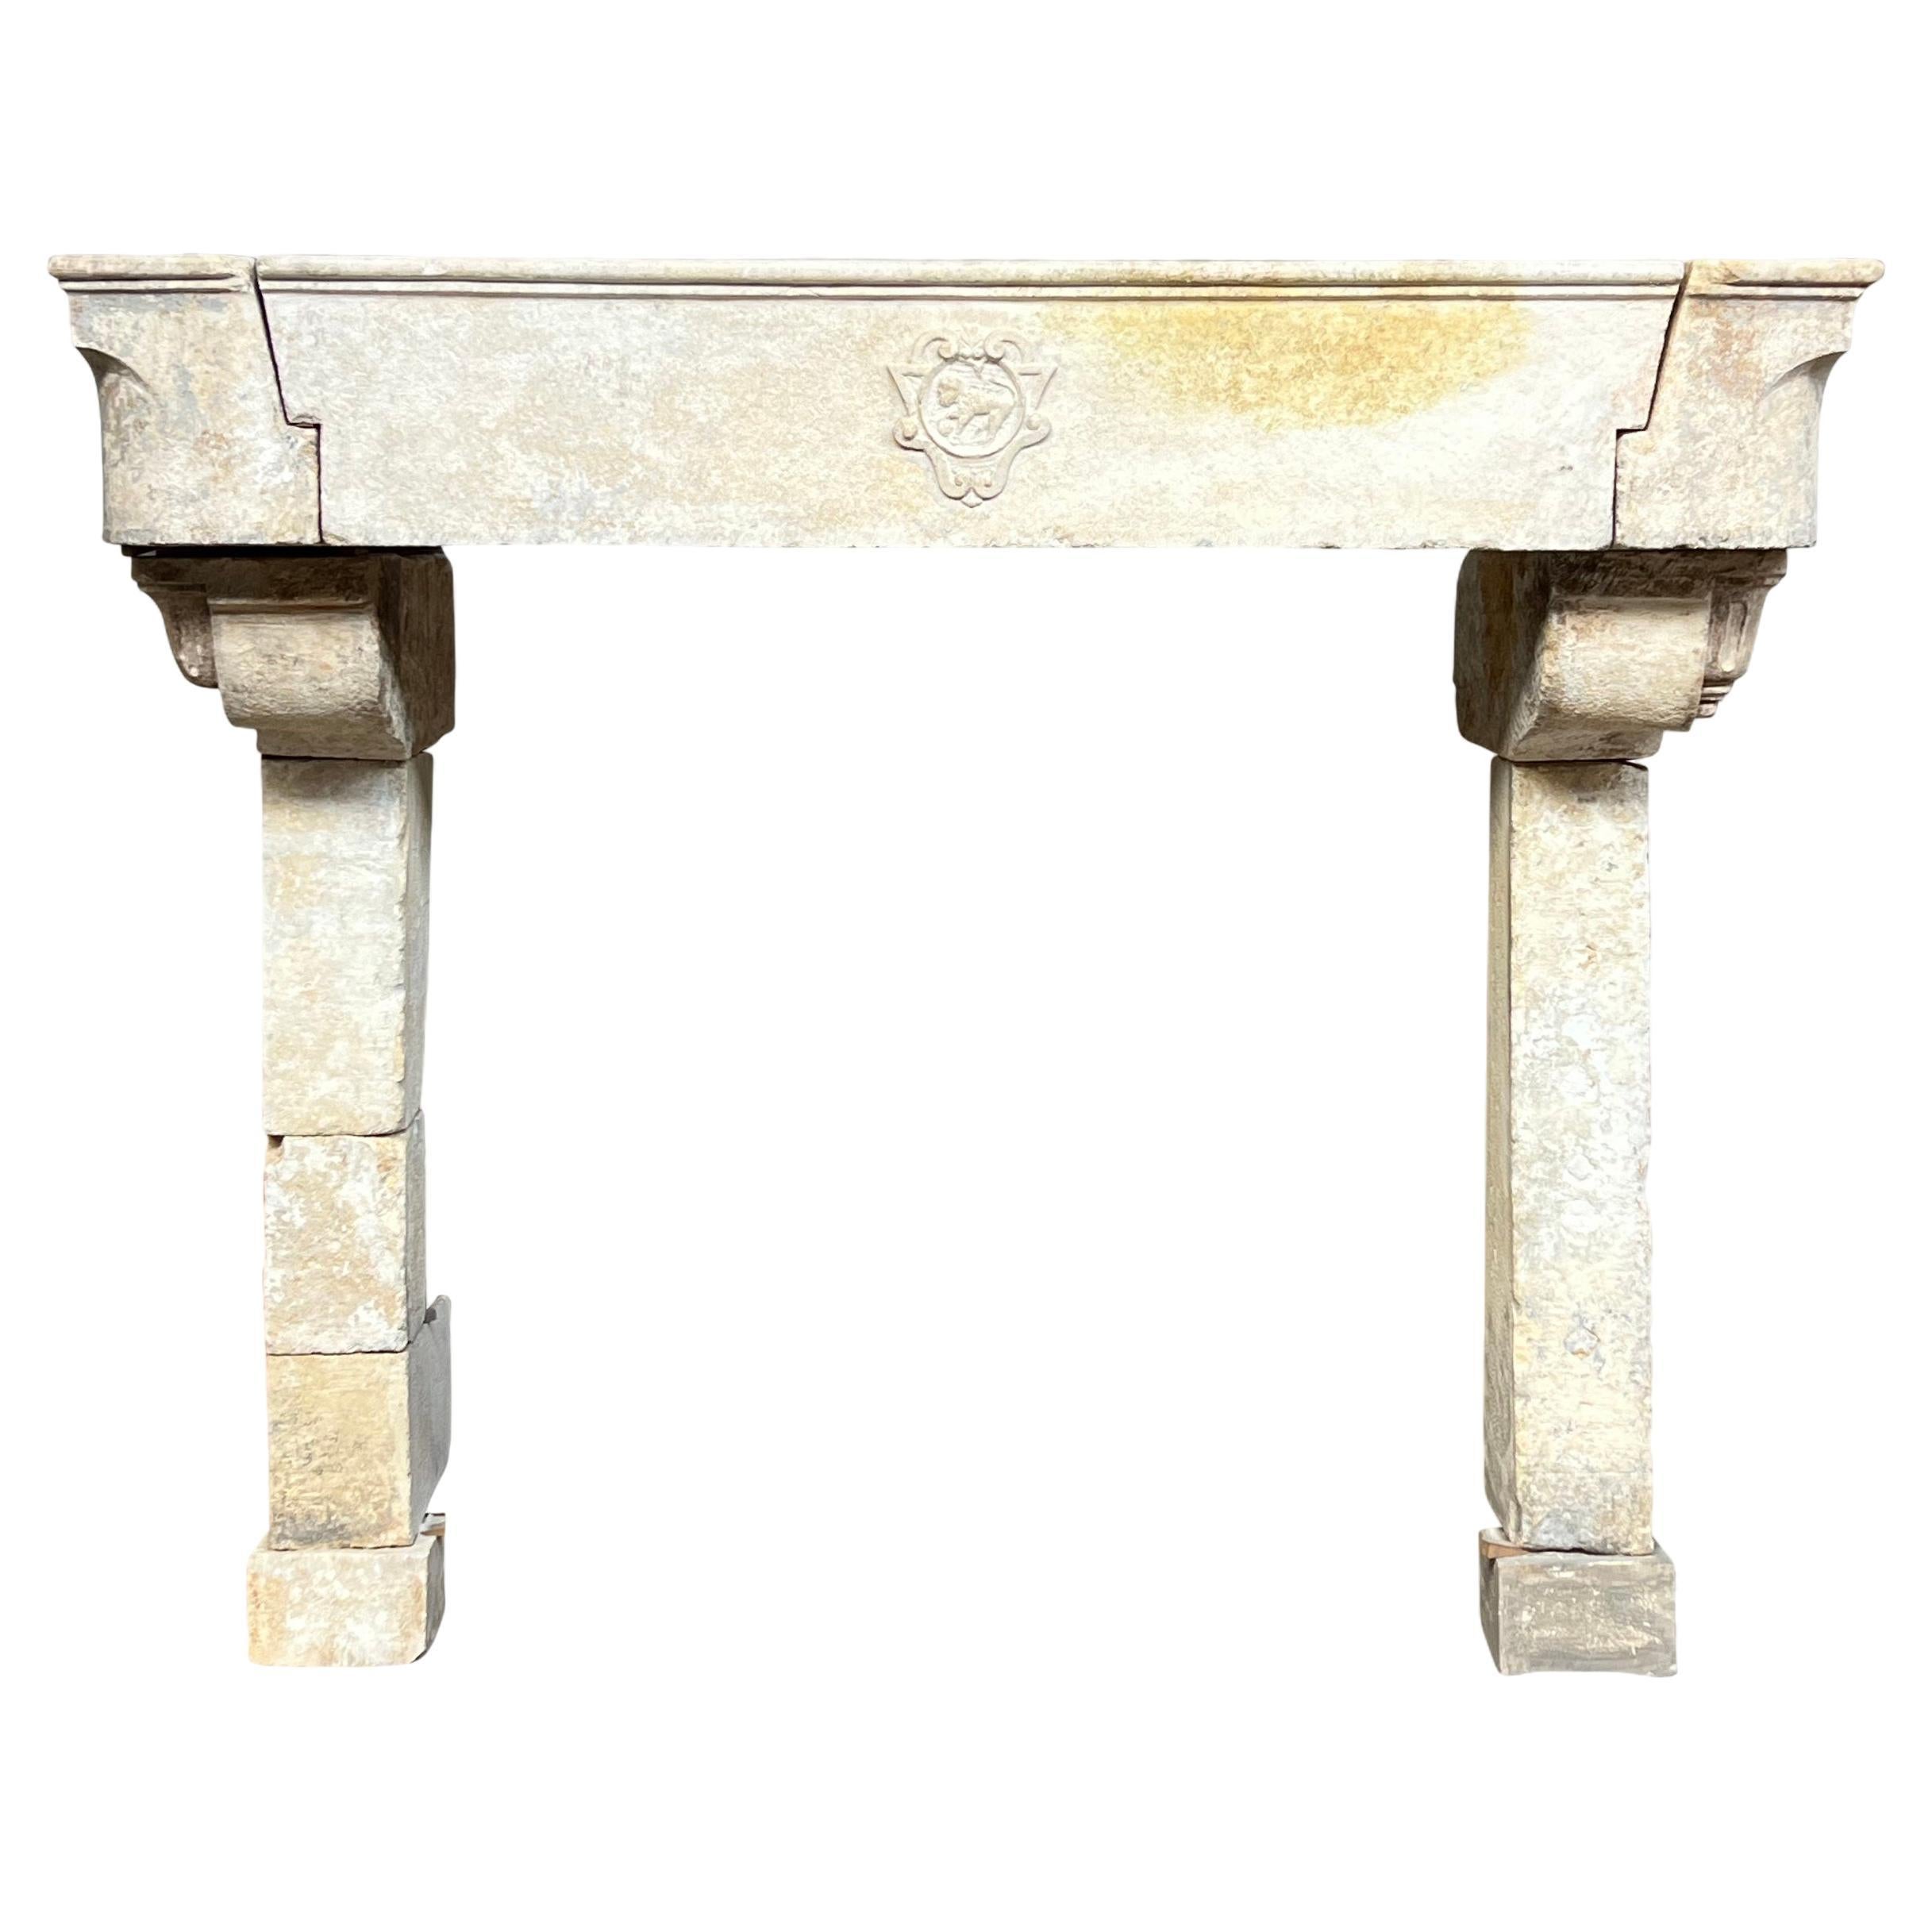 Grand French Cottage Chateau Fireplace In Limestone With Lion Detail